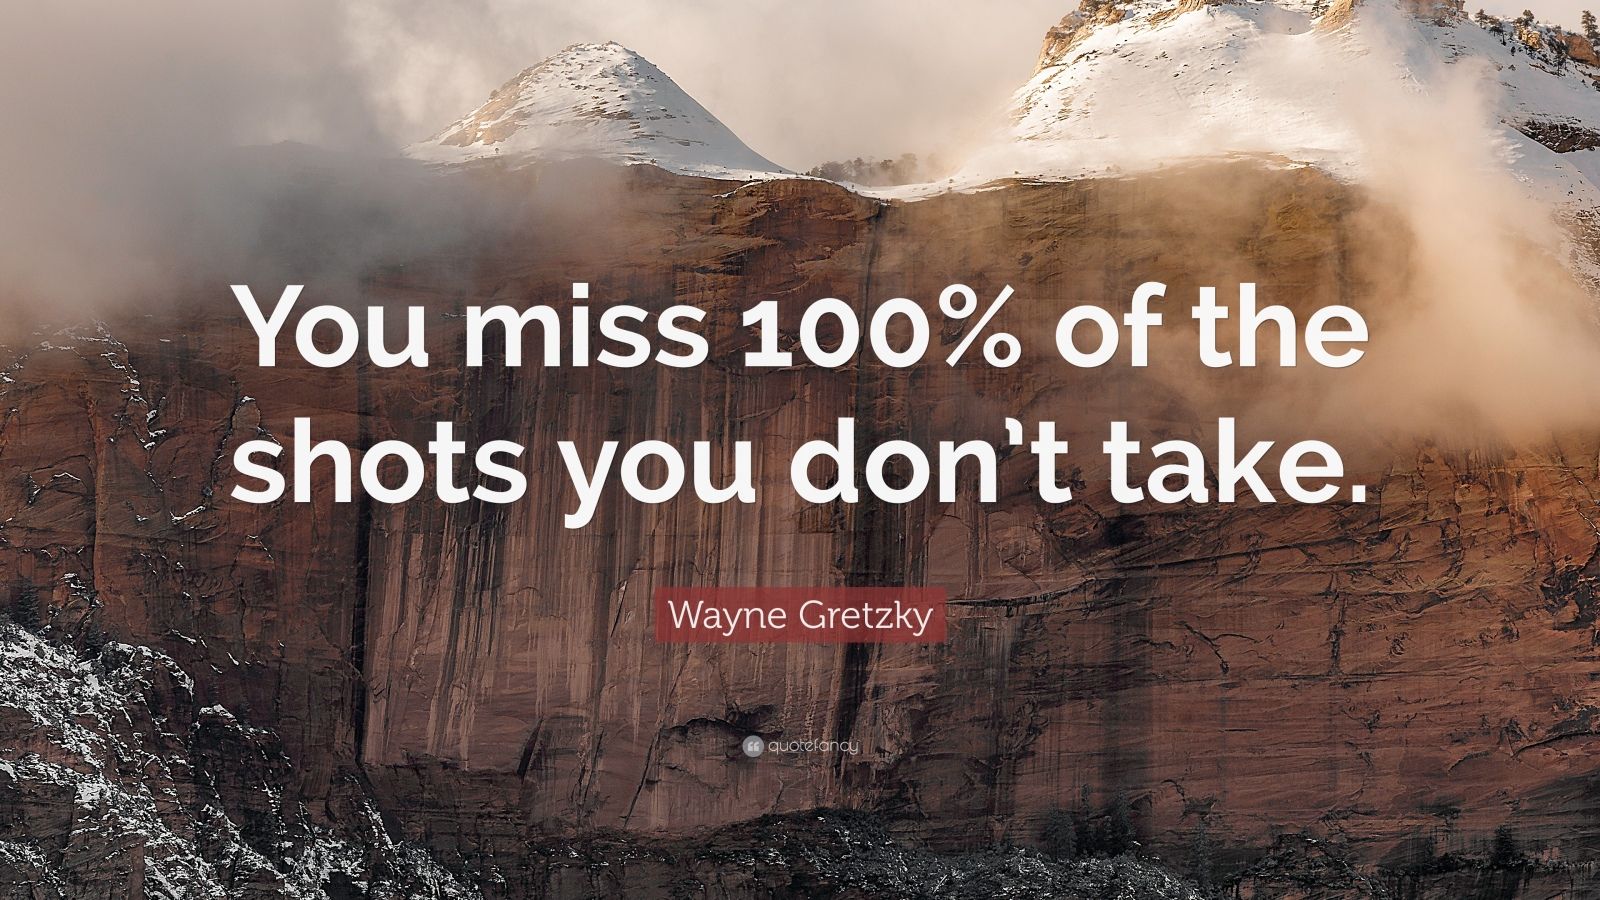 Wayne Gretzky Quote “You miss 100 of the shots you don’t